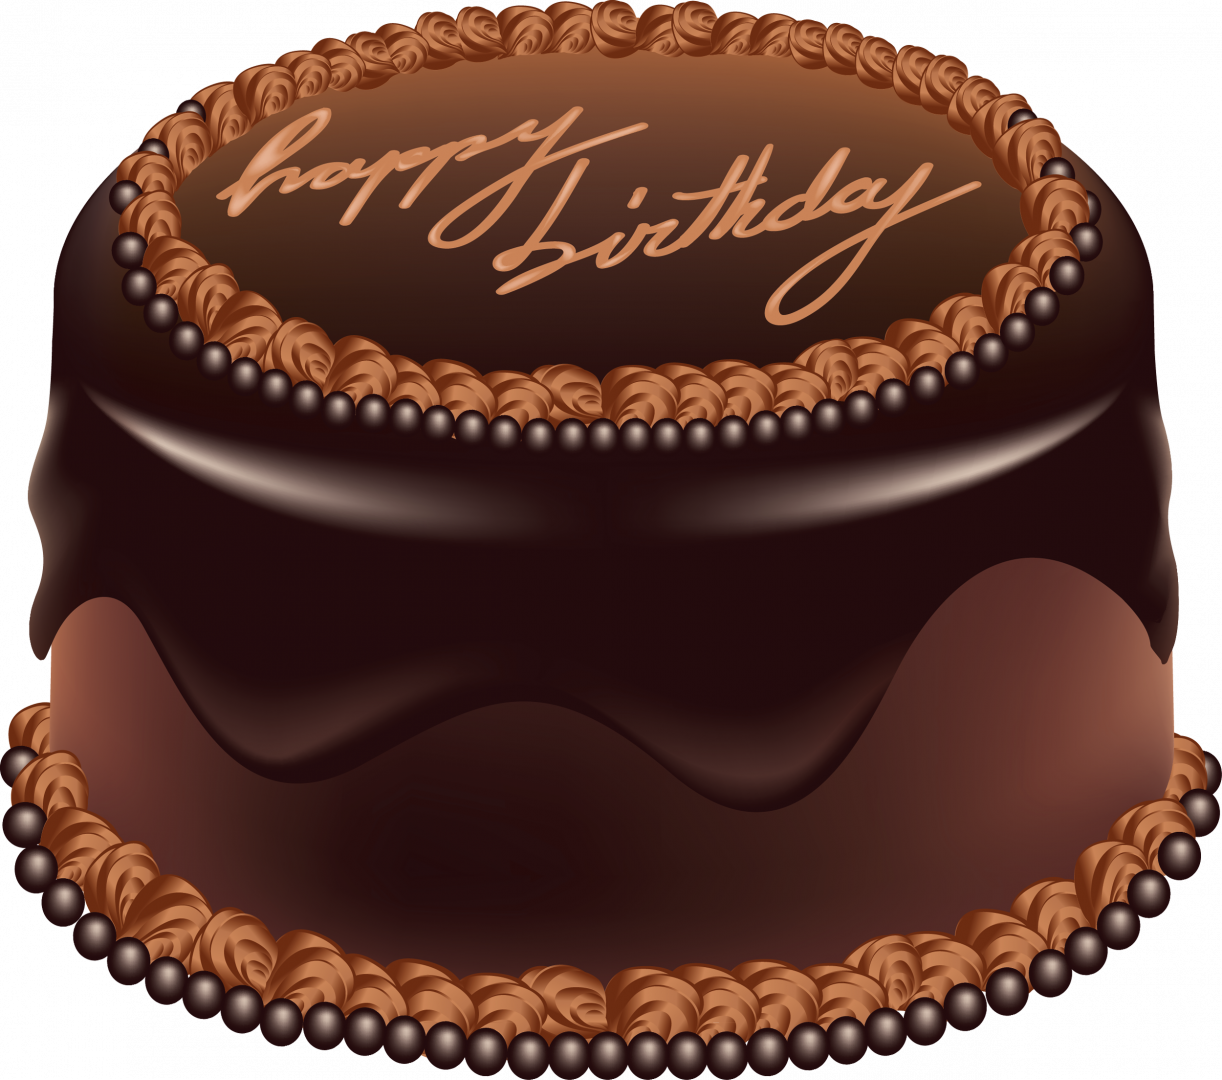 Chocolate Cake PNG HD Transparent Chocolate Cake HD.PNG Images.